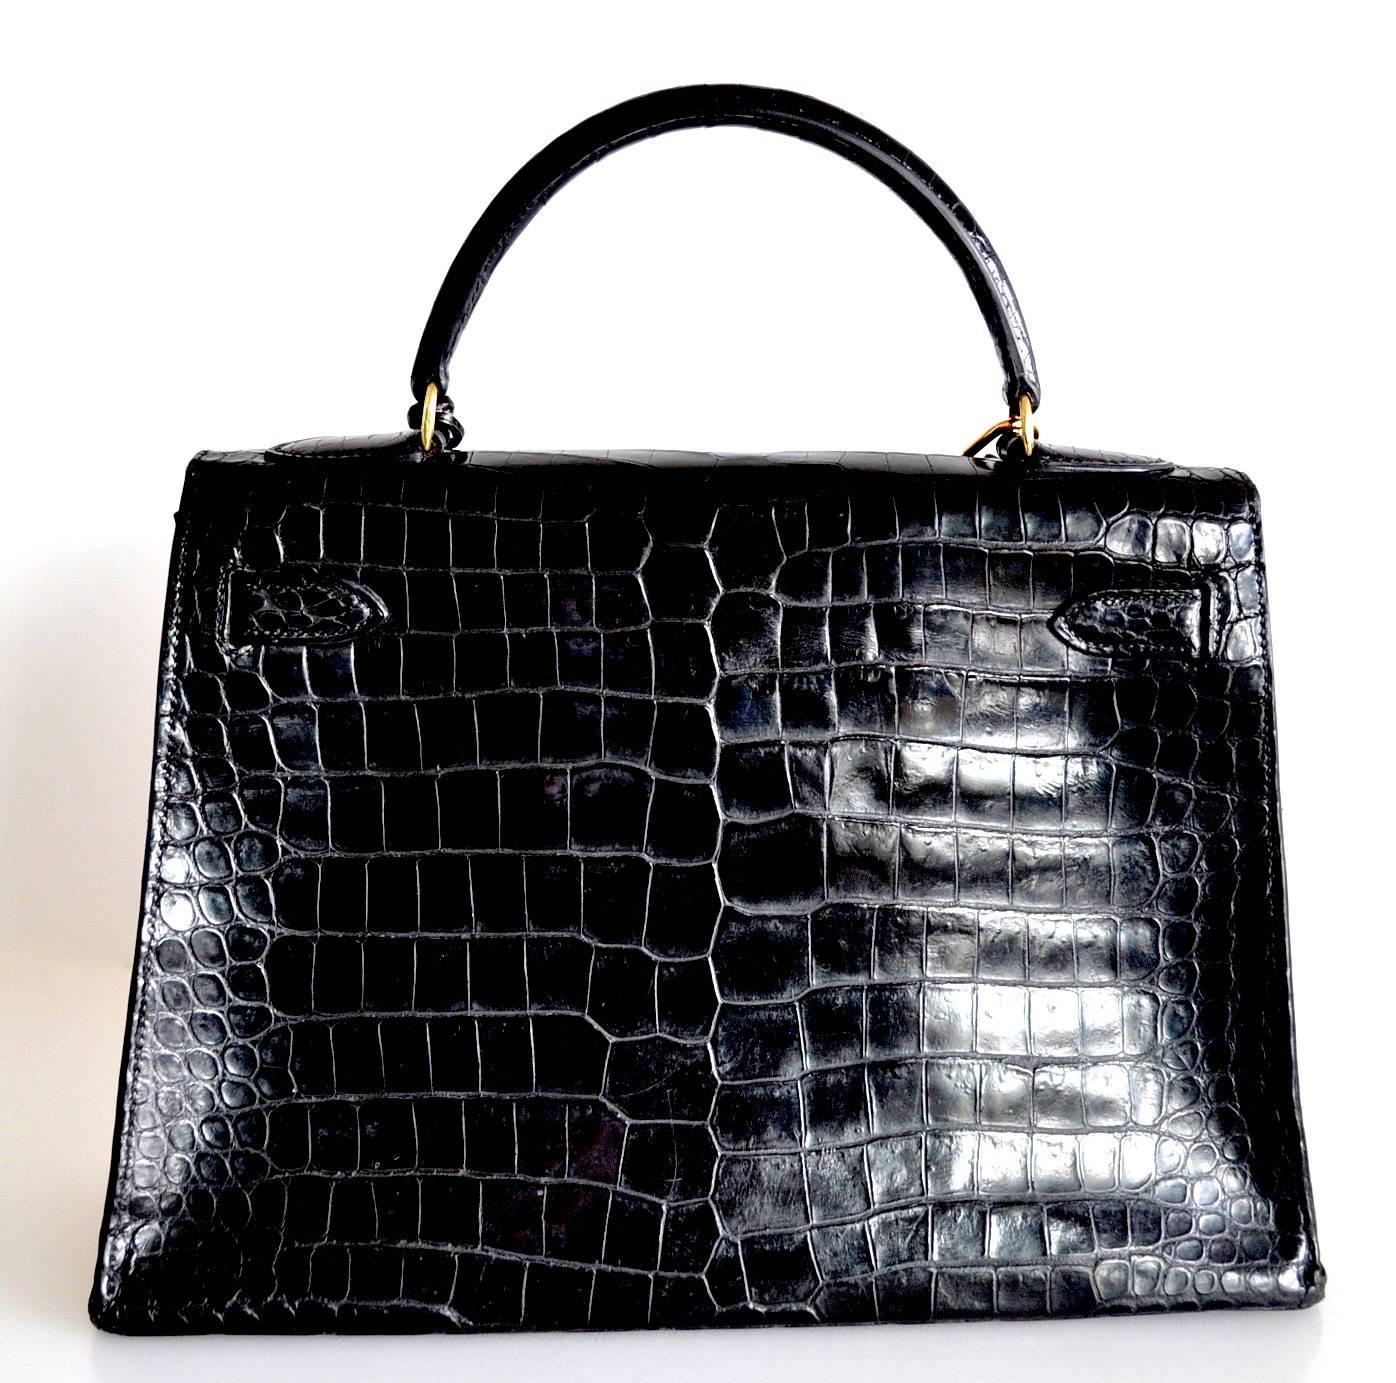 Hermes Kelly 32 Black Crocodile
 
Black shiny crocodile skin with gold hardware
Sellier model
 
The bag is lined with chevre leather. Interior is in good condition with a pocket.
This bag is in good condition. It is a vintage bag from 70s.